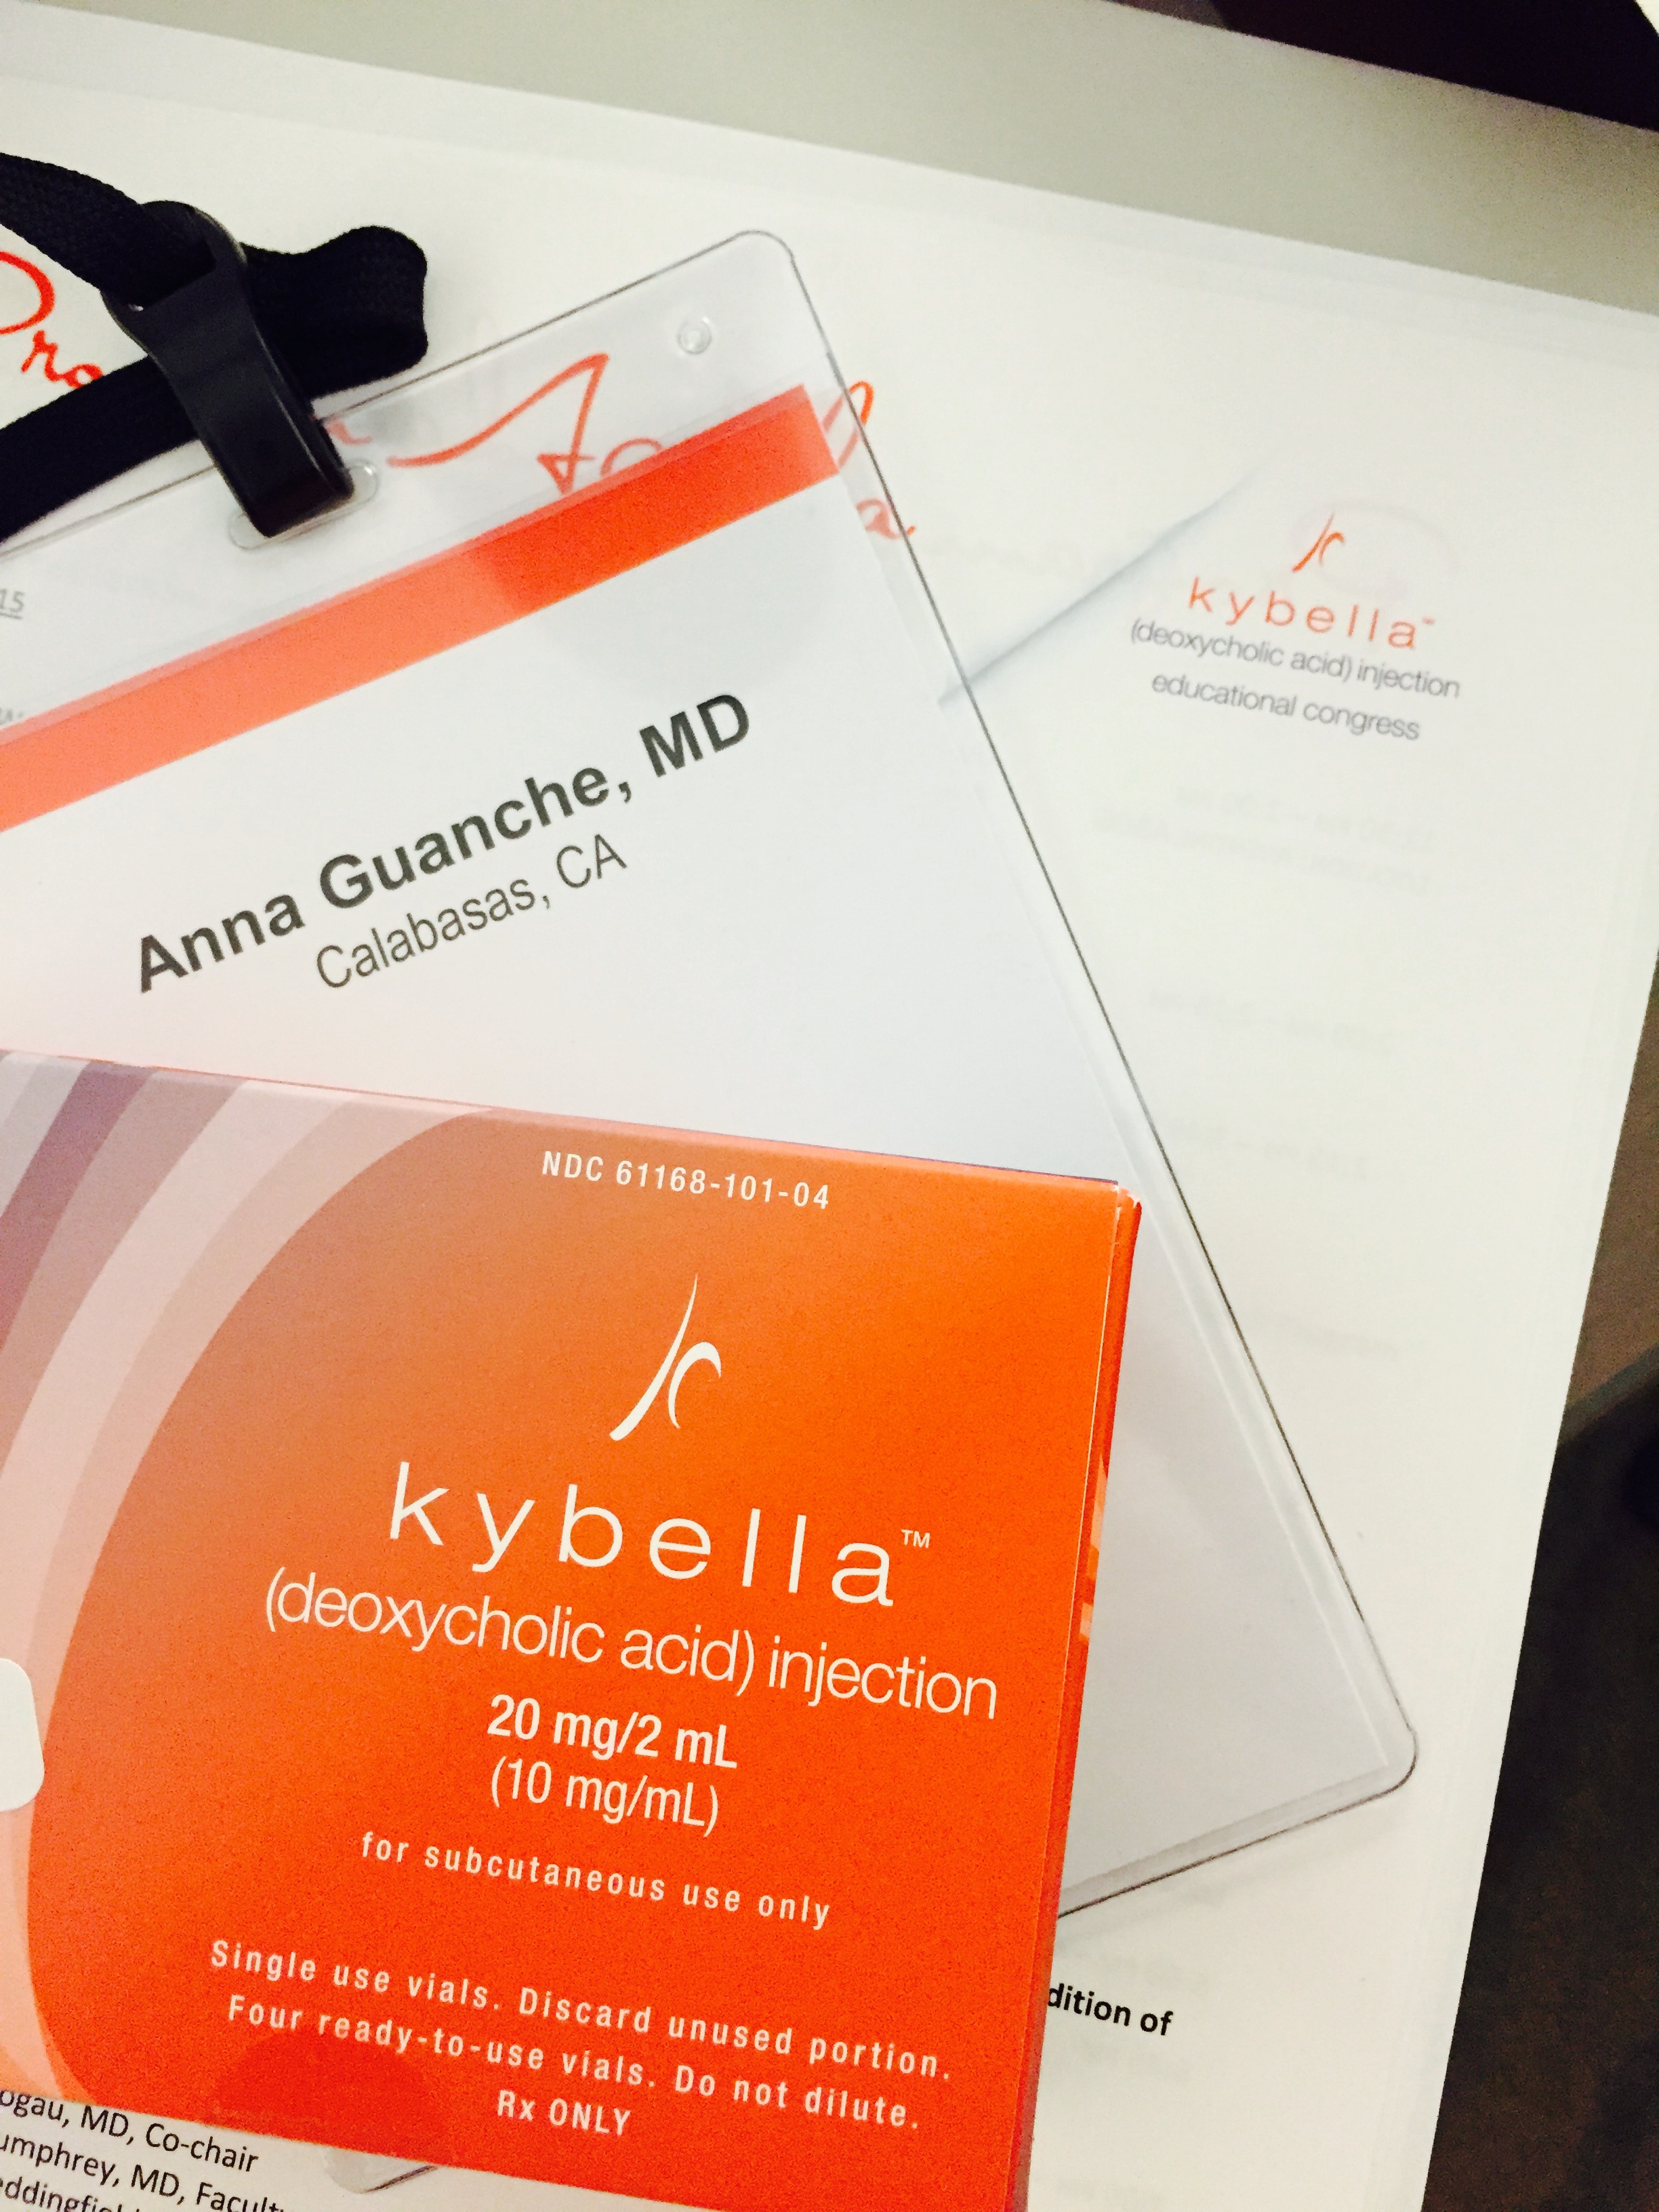 Kybella reduces double-chin